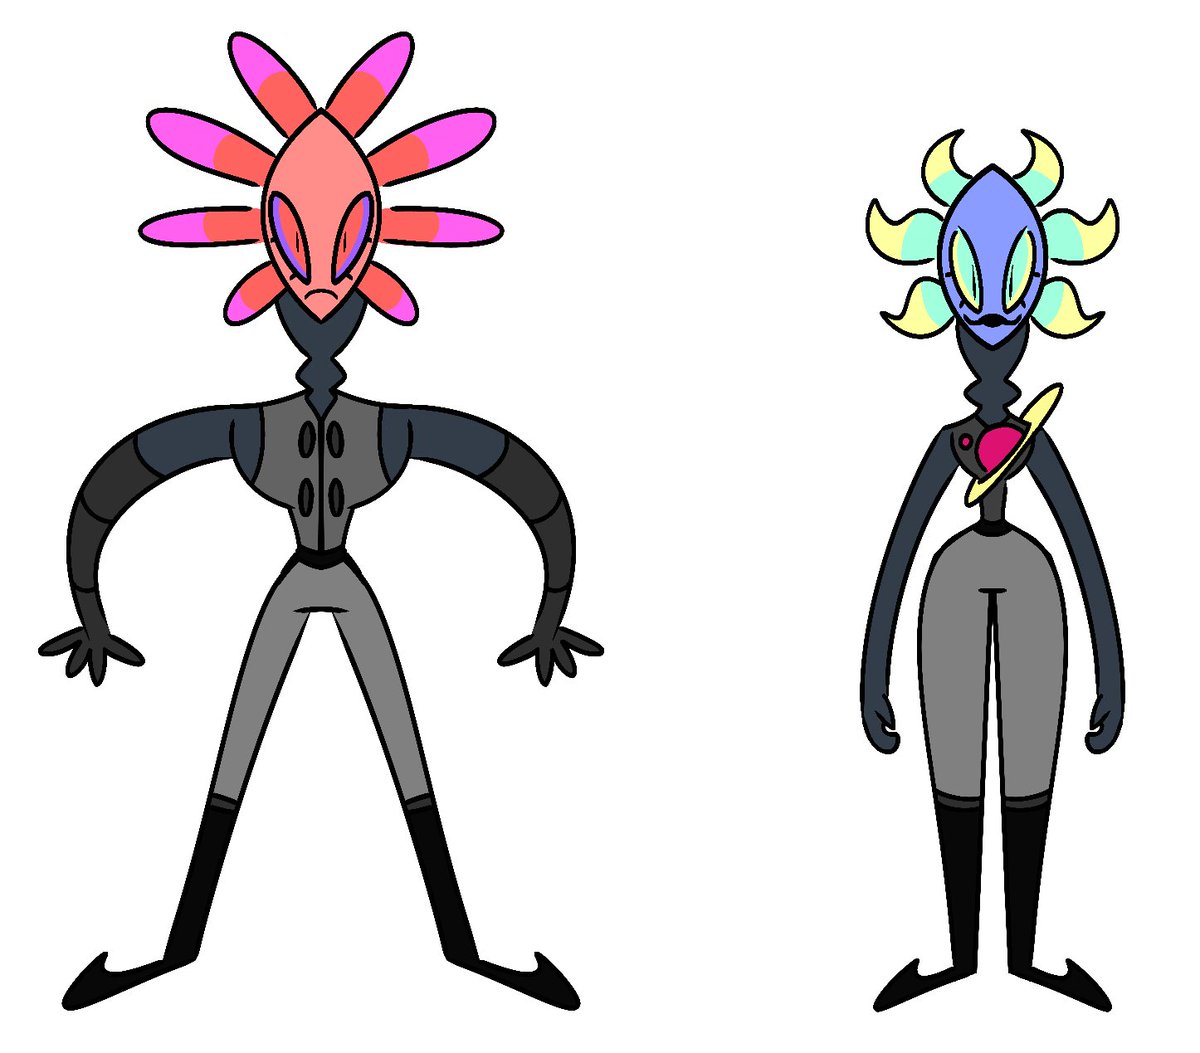 Some silly alien designs I drew instead of going to bed